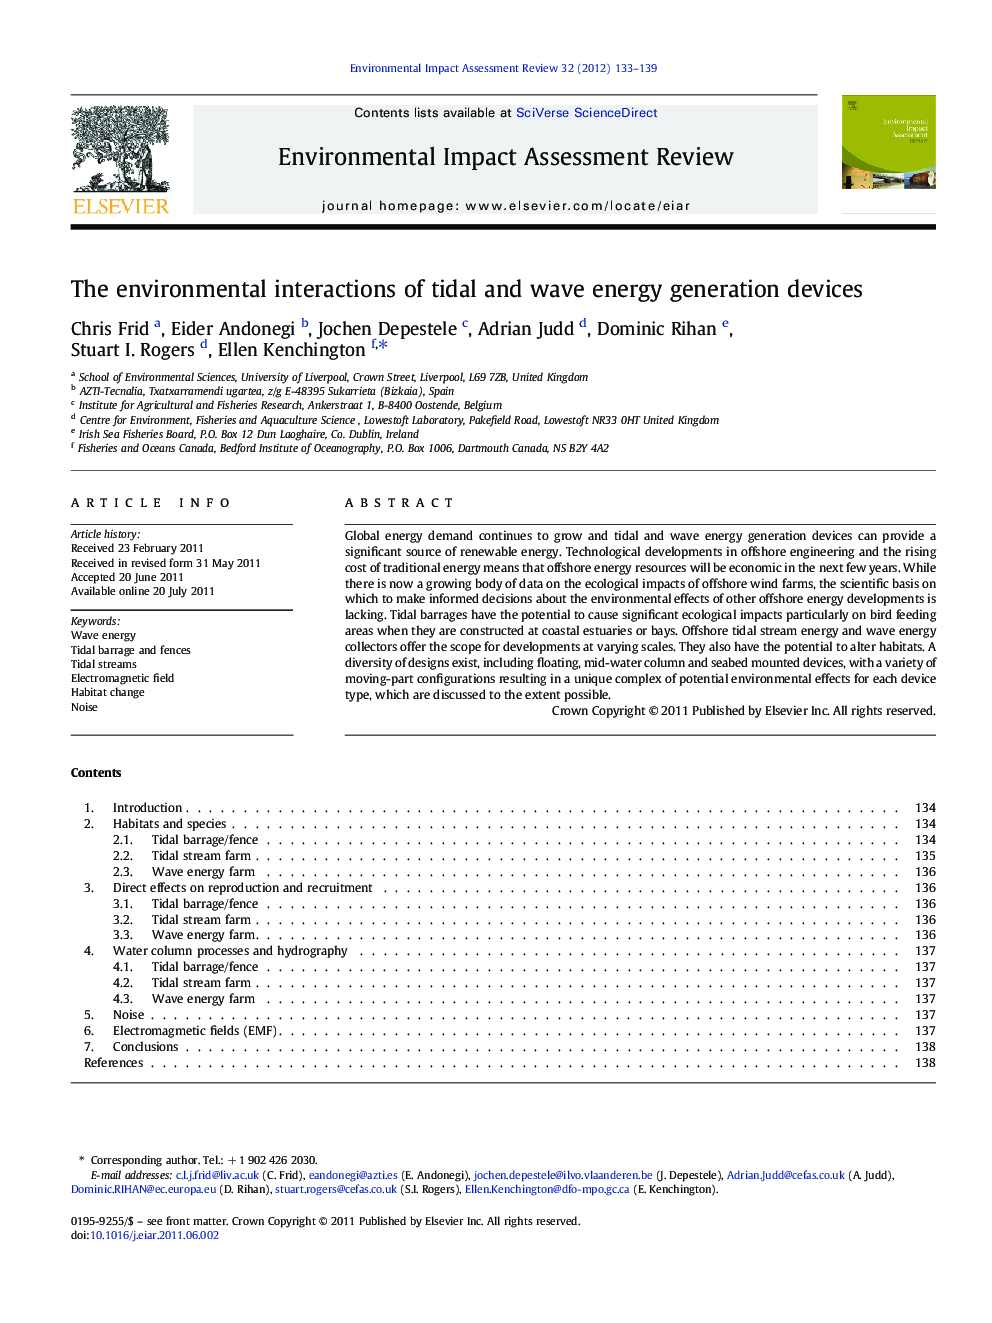 The environmental interactions of tidal and wave energy generation devices